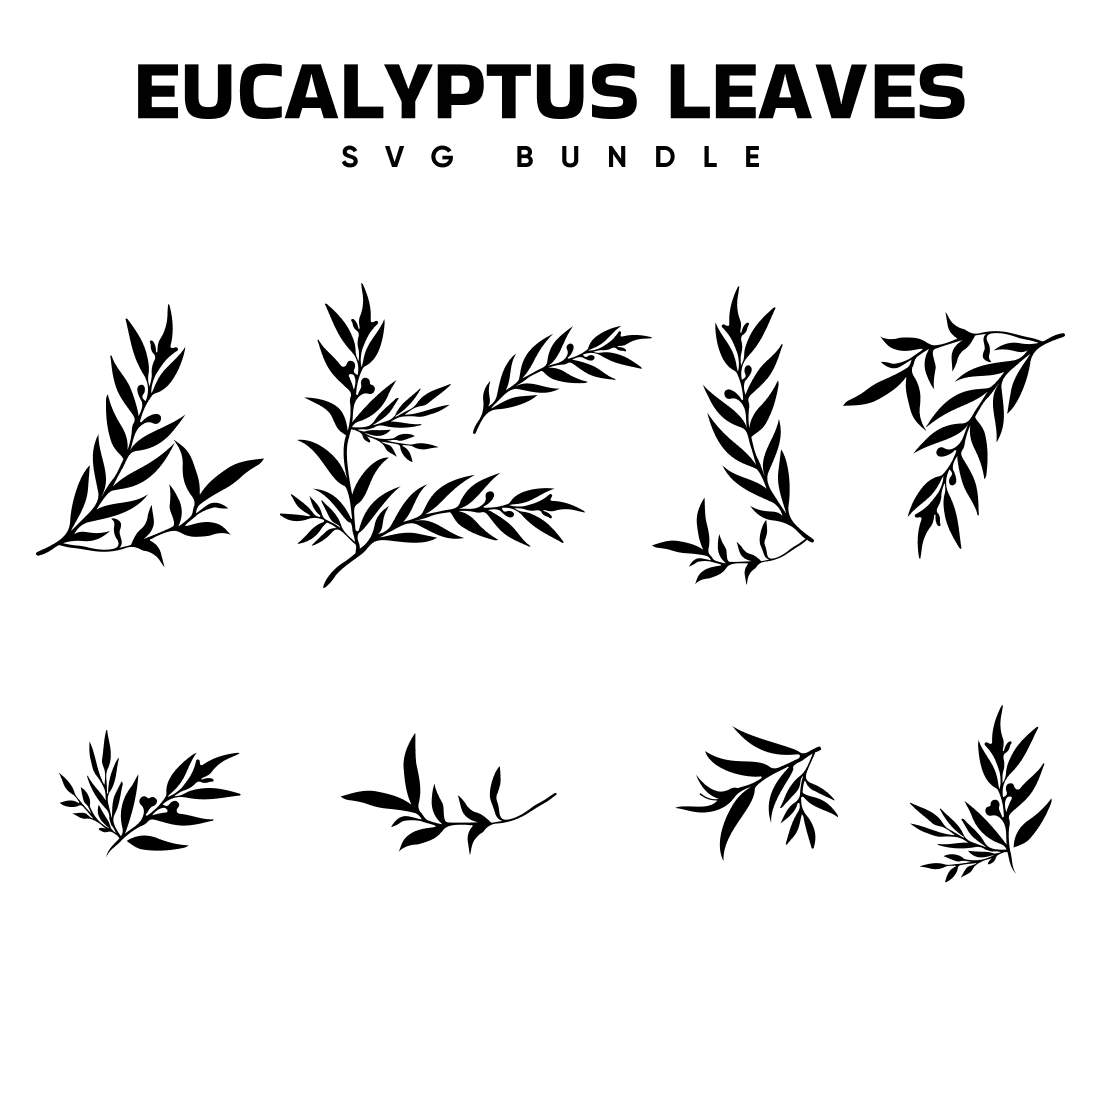 Images with eucalyptus leaves bundle.